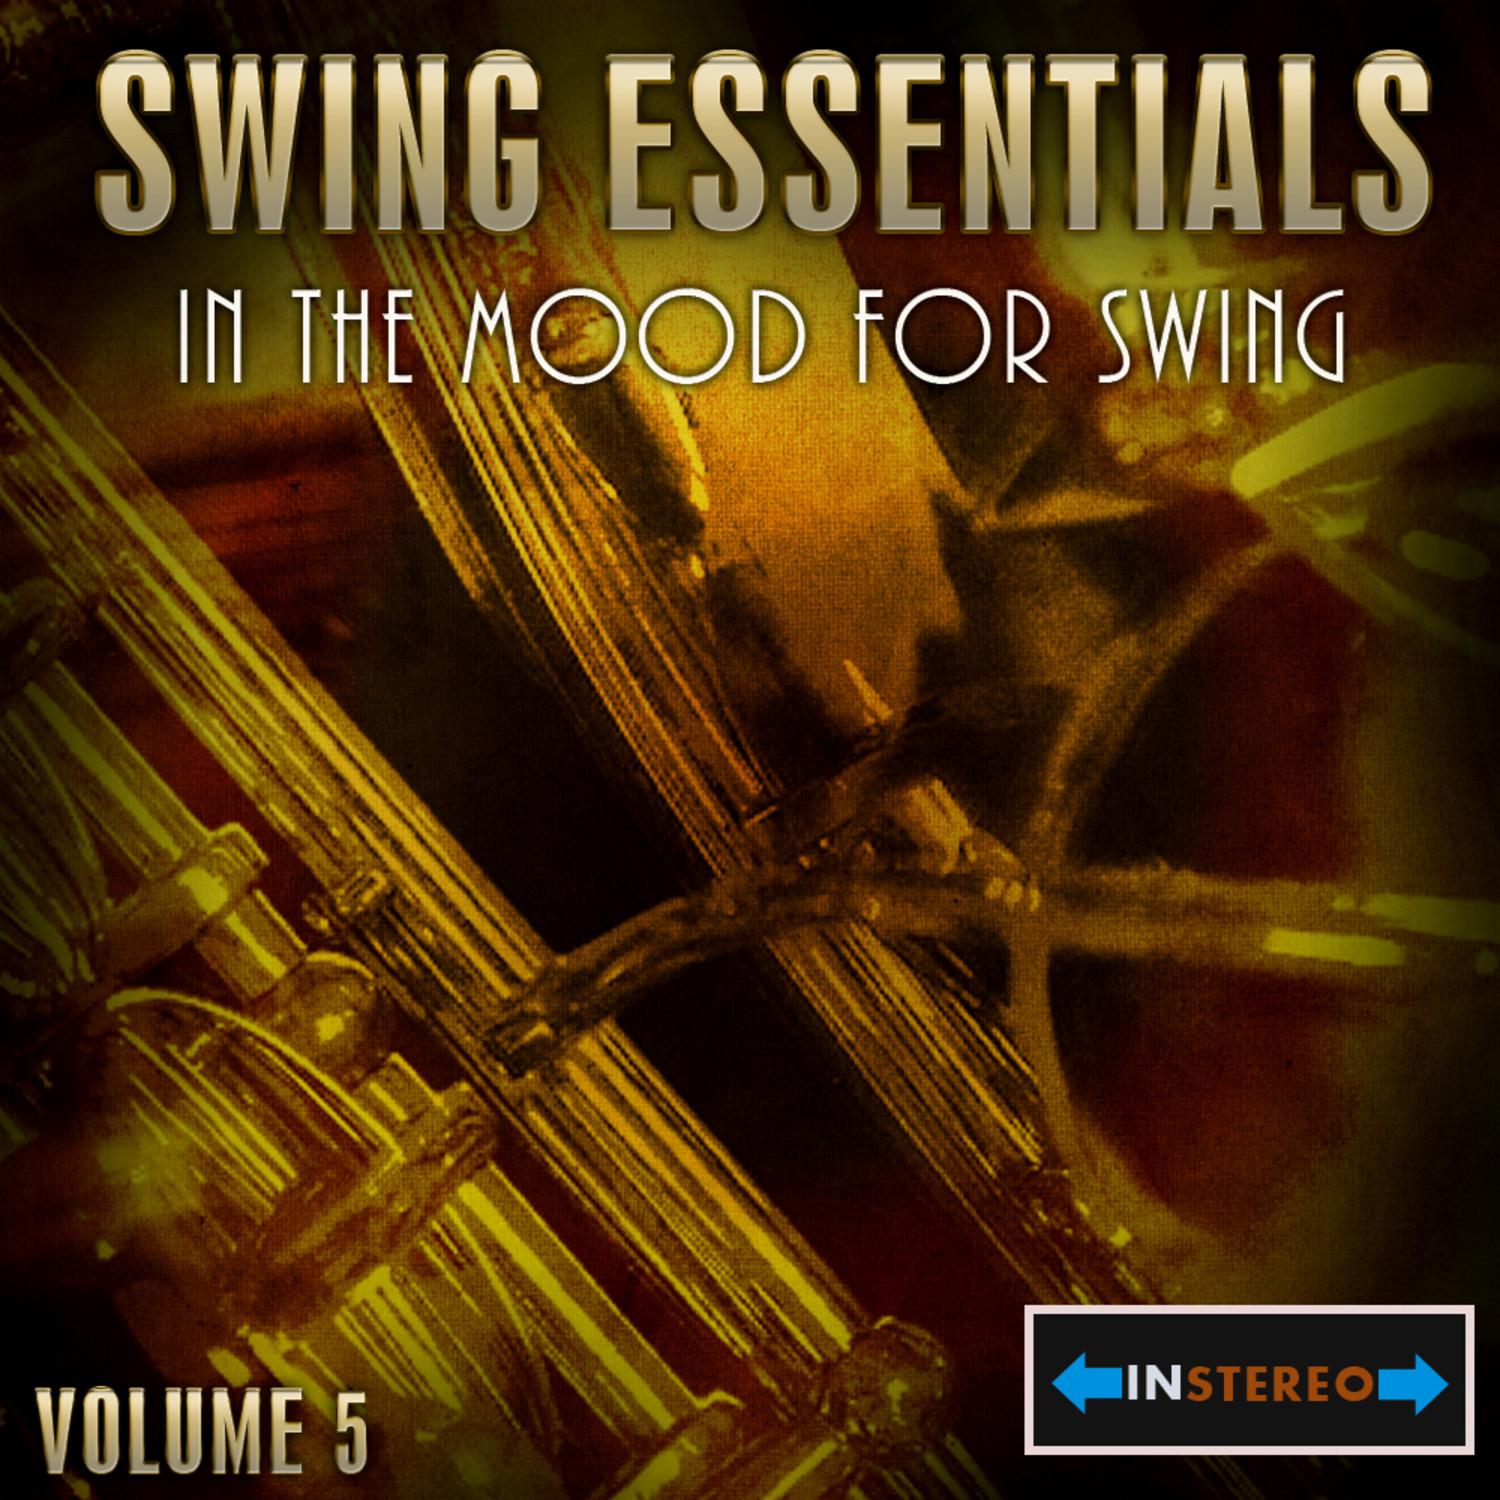 Swing Essentials Vol 5 - In The Mood For Swing